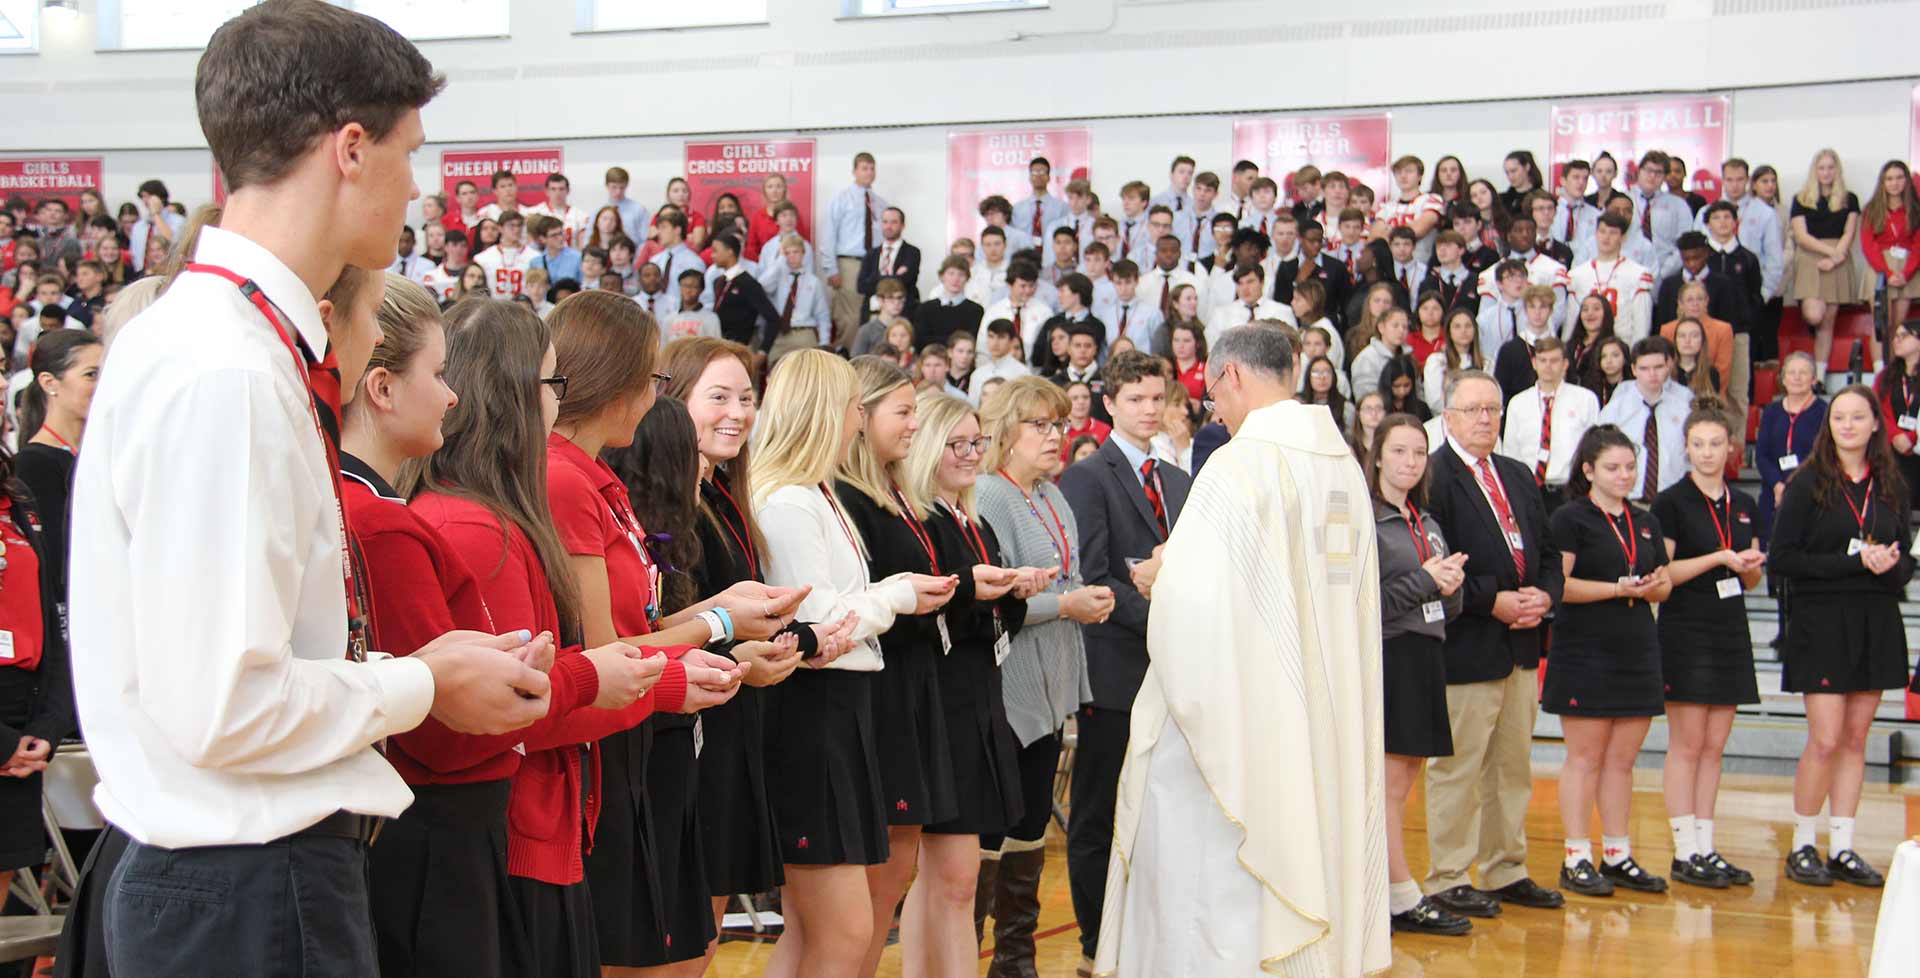 marks-of-a-marist-students-receiving-communion-header-image